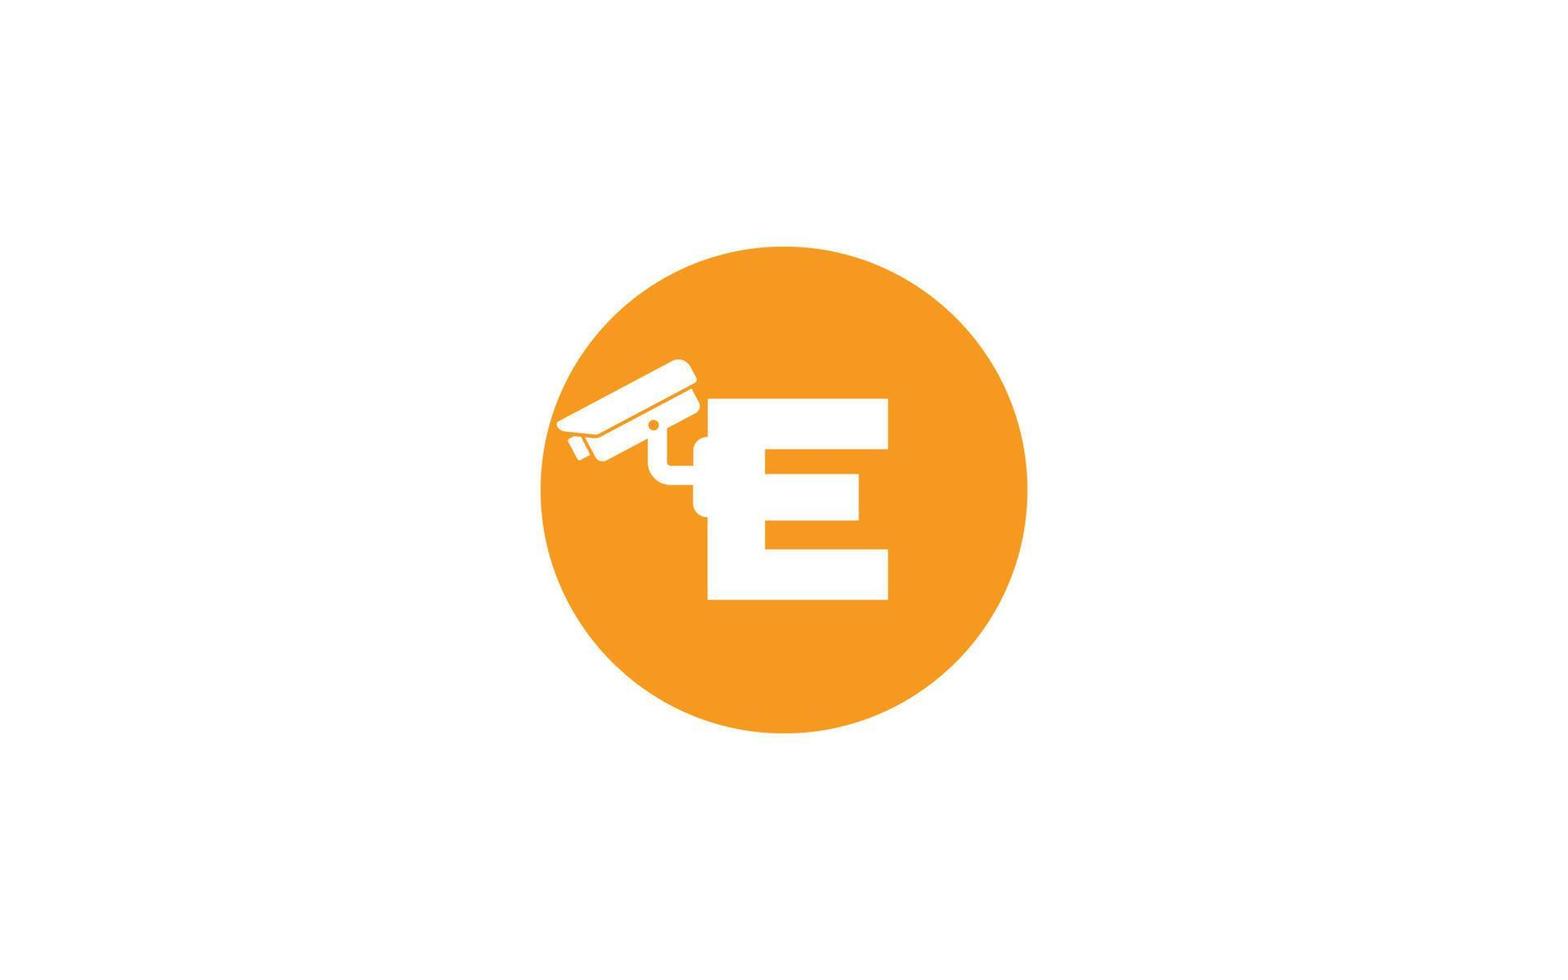 E logo cctv for identity. security template vector illustration for your brand.